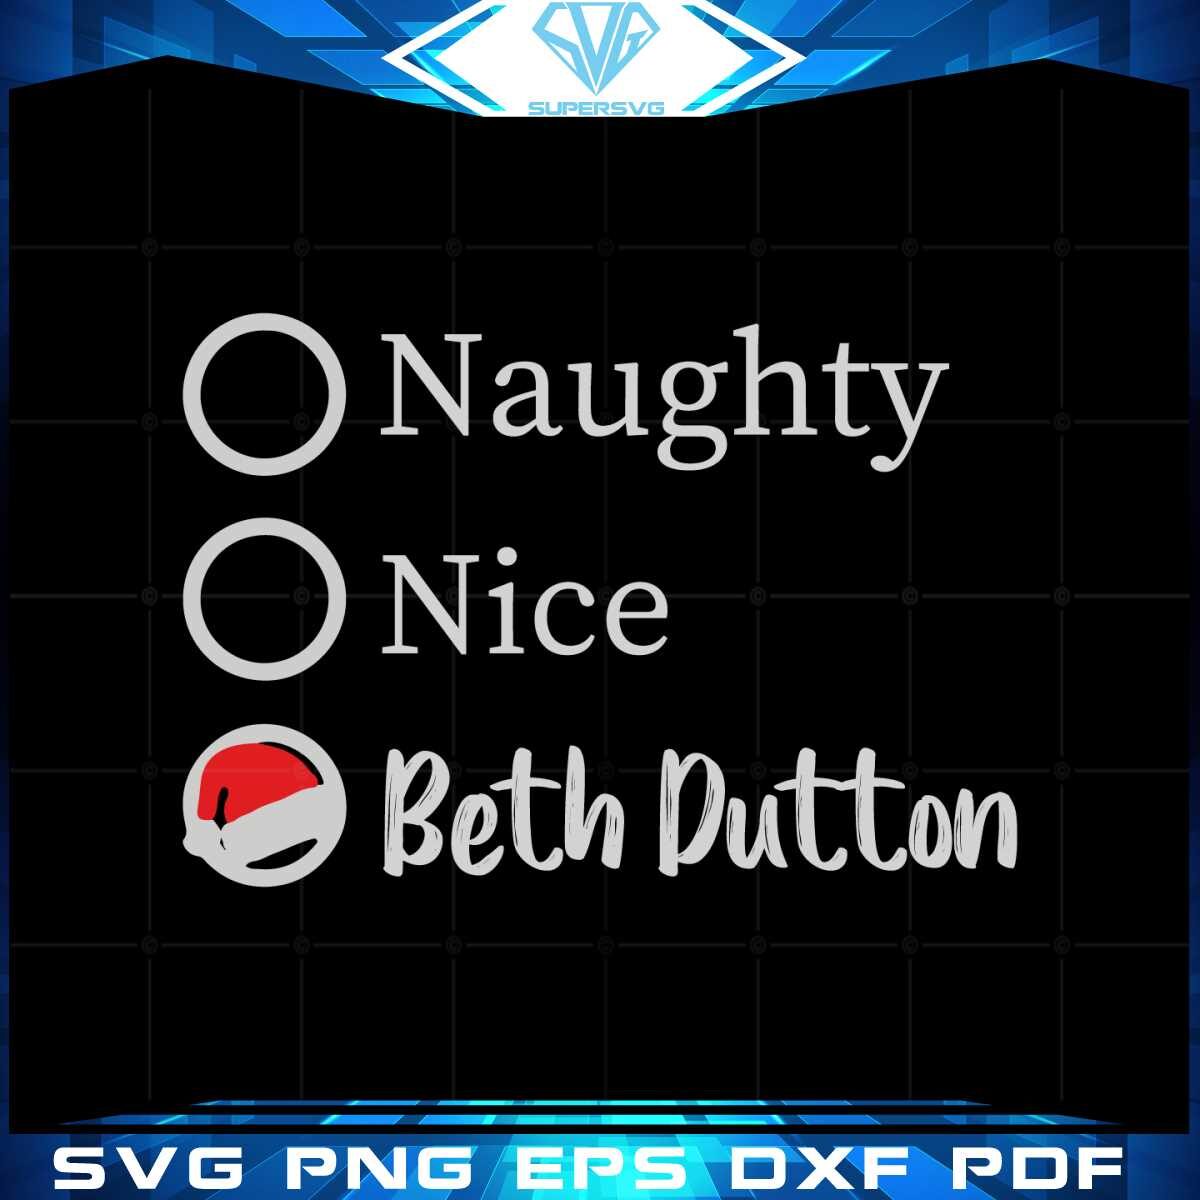 naughty-nice-beth-dutton-christmas-svg-graphic-designs-files